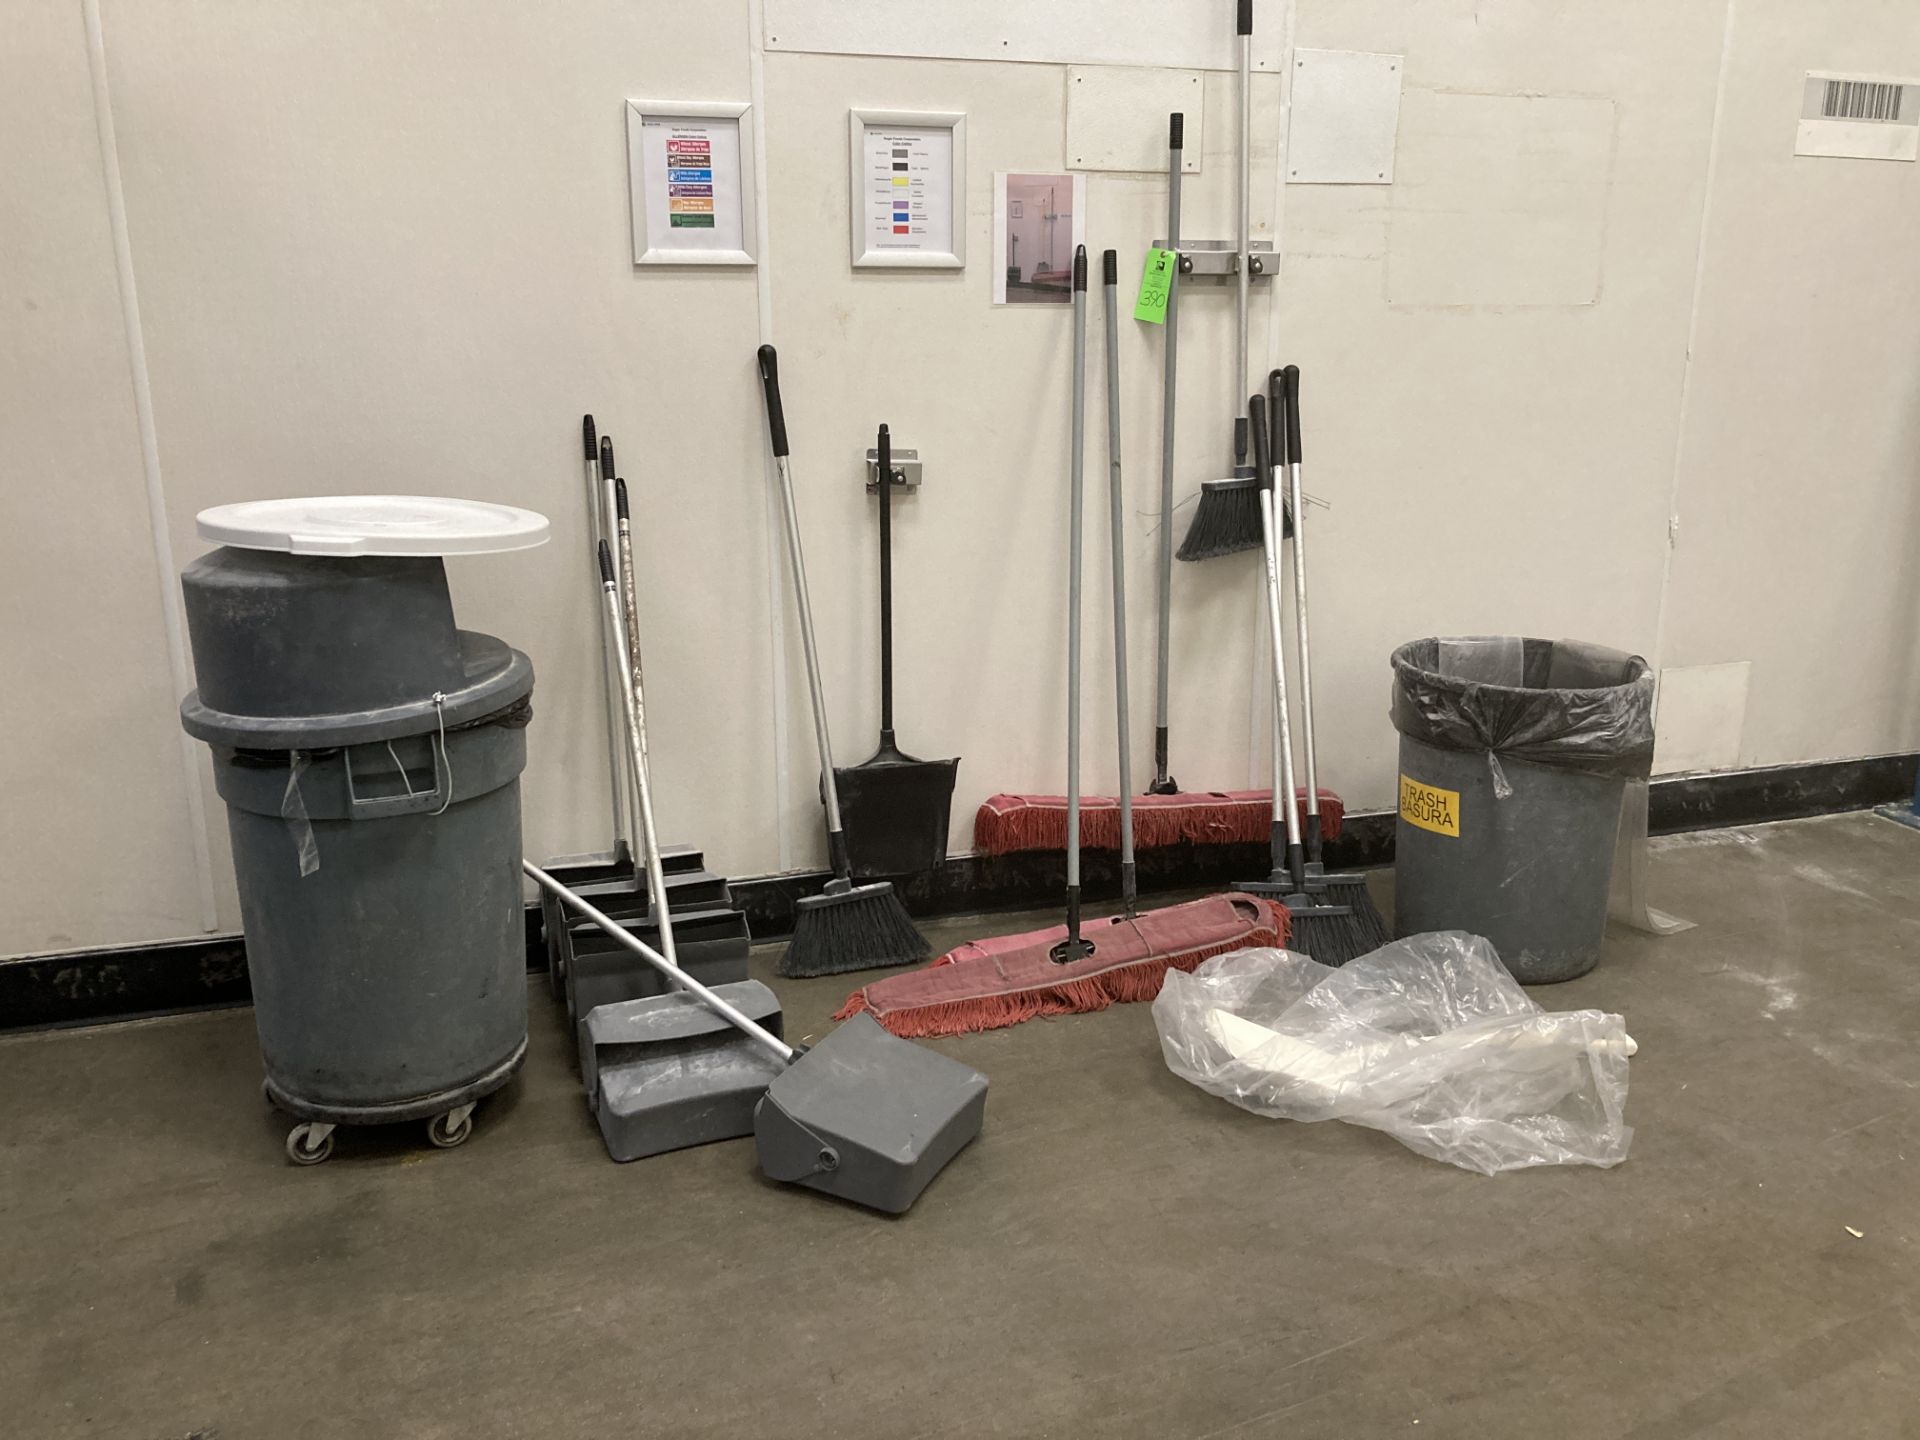 LOT OF waste containers, mops, wall rack, dust pans Rigging Fee: $50